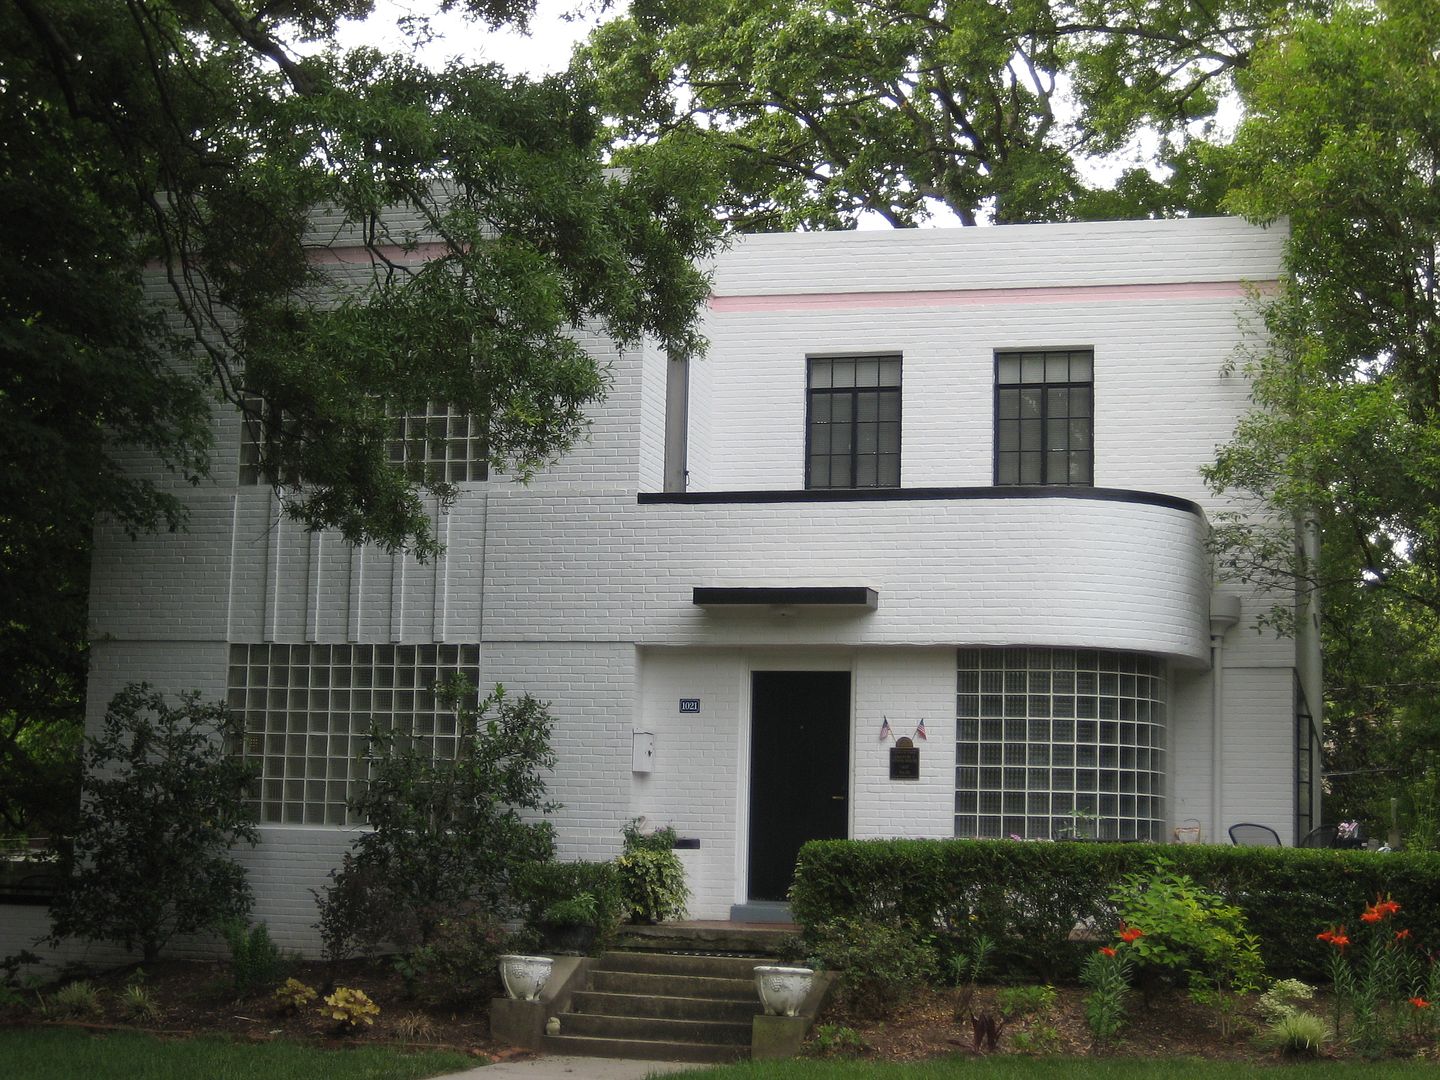 And this is NOT a kit home, but it is a DAZZLING architectural treasure. Its Art Moderne and one of my all time favorite housing styles - and its right there in Durham!